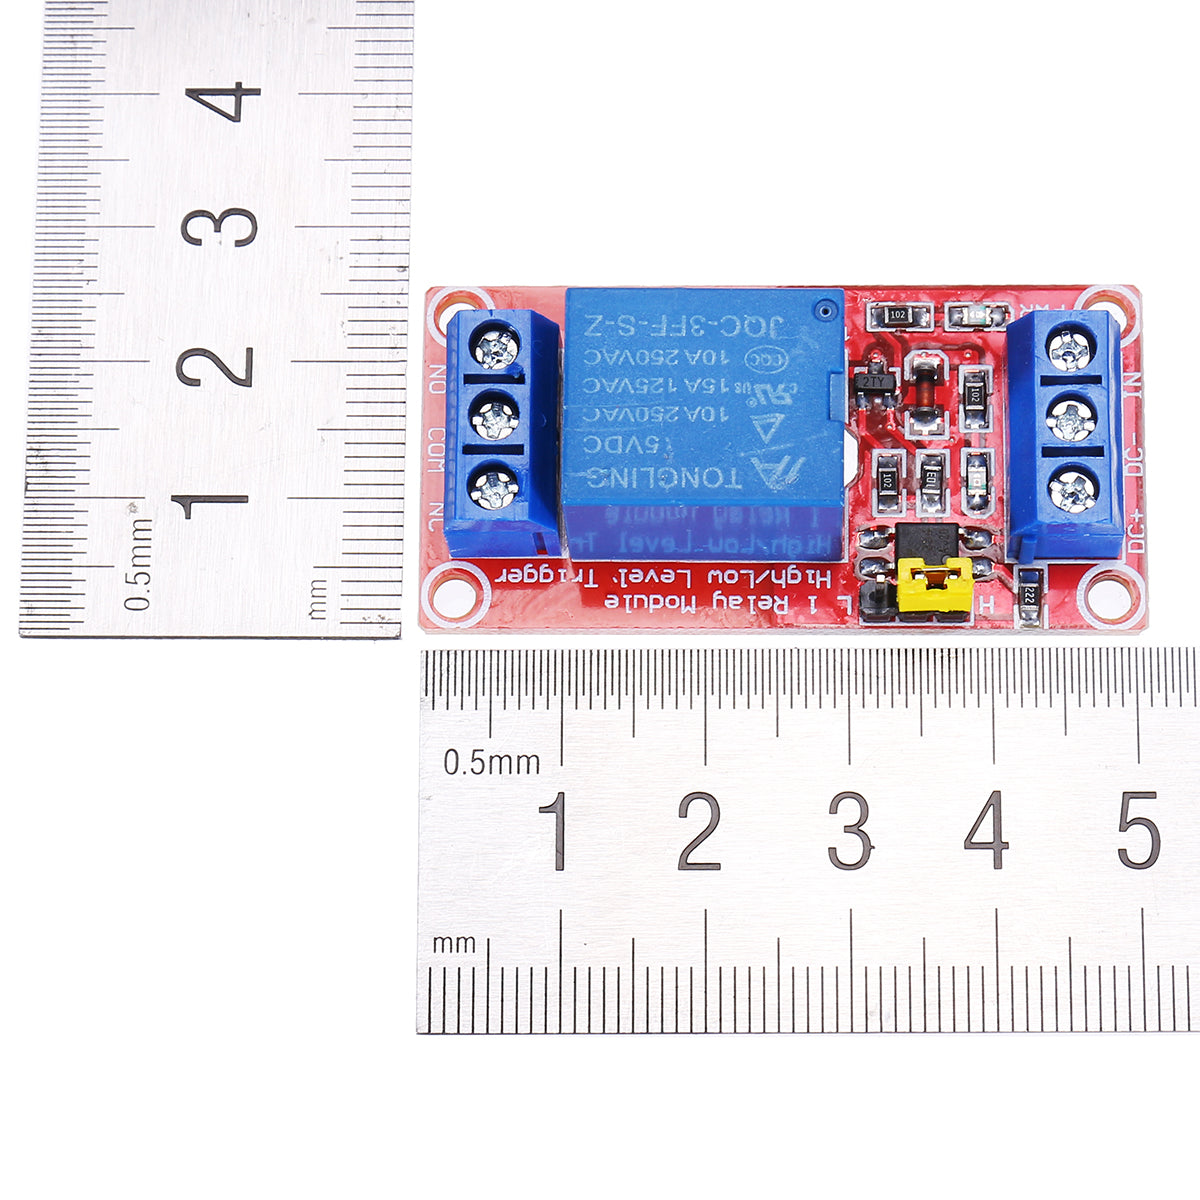 5V 1 / 2 / 4 / 8 Channel Relay High Low Level Optocoupler Module For PI - Auto GoShop